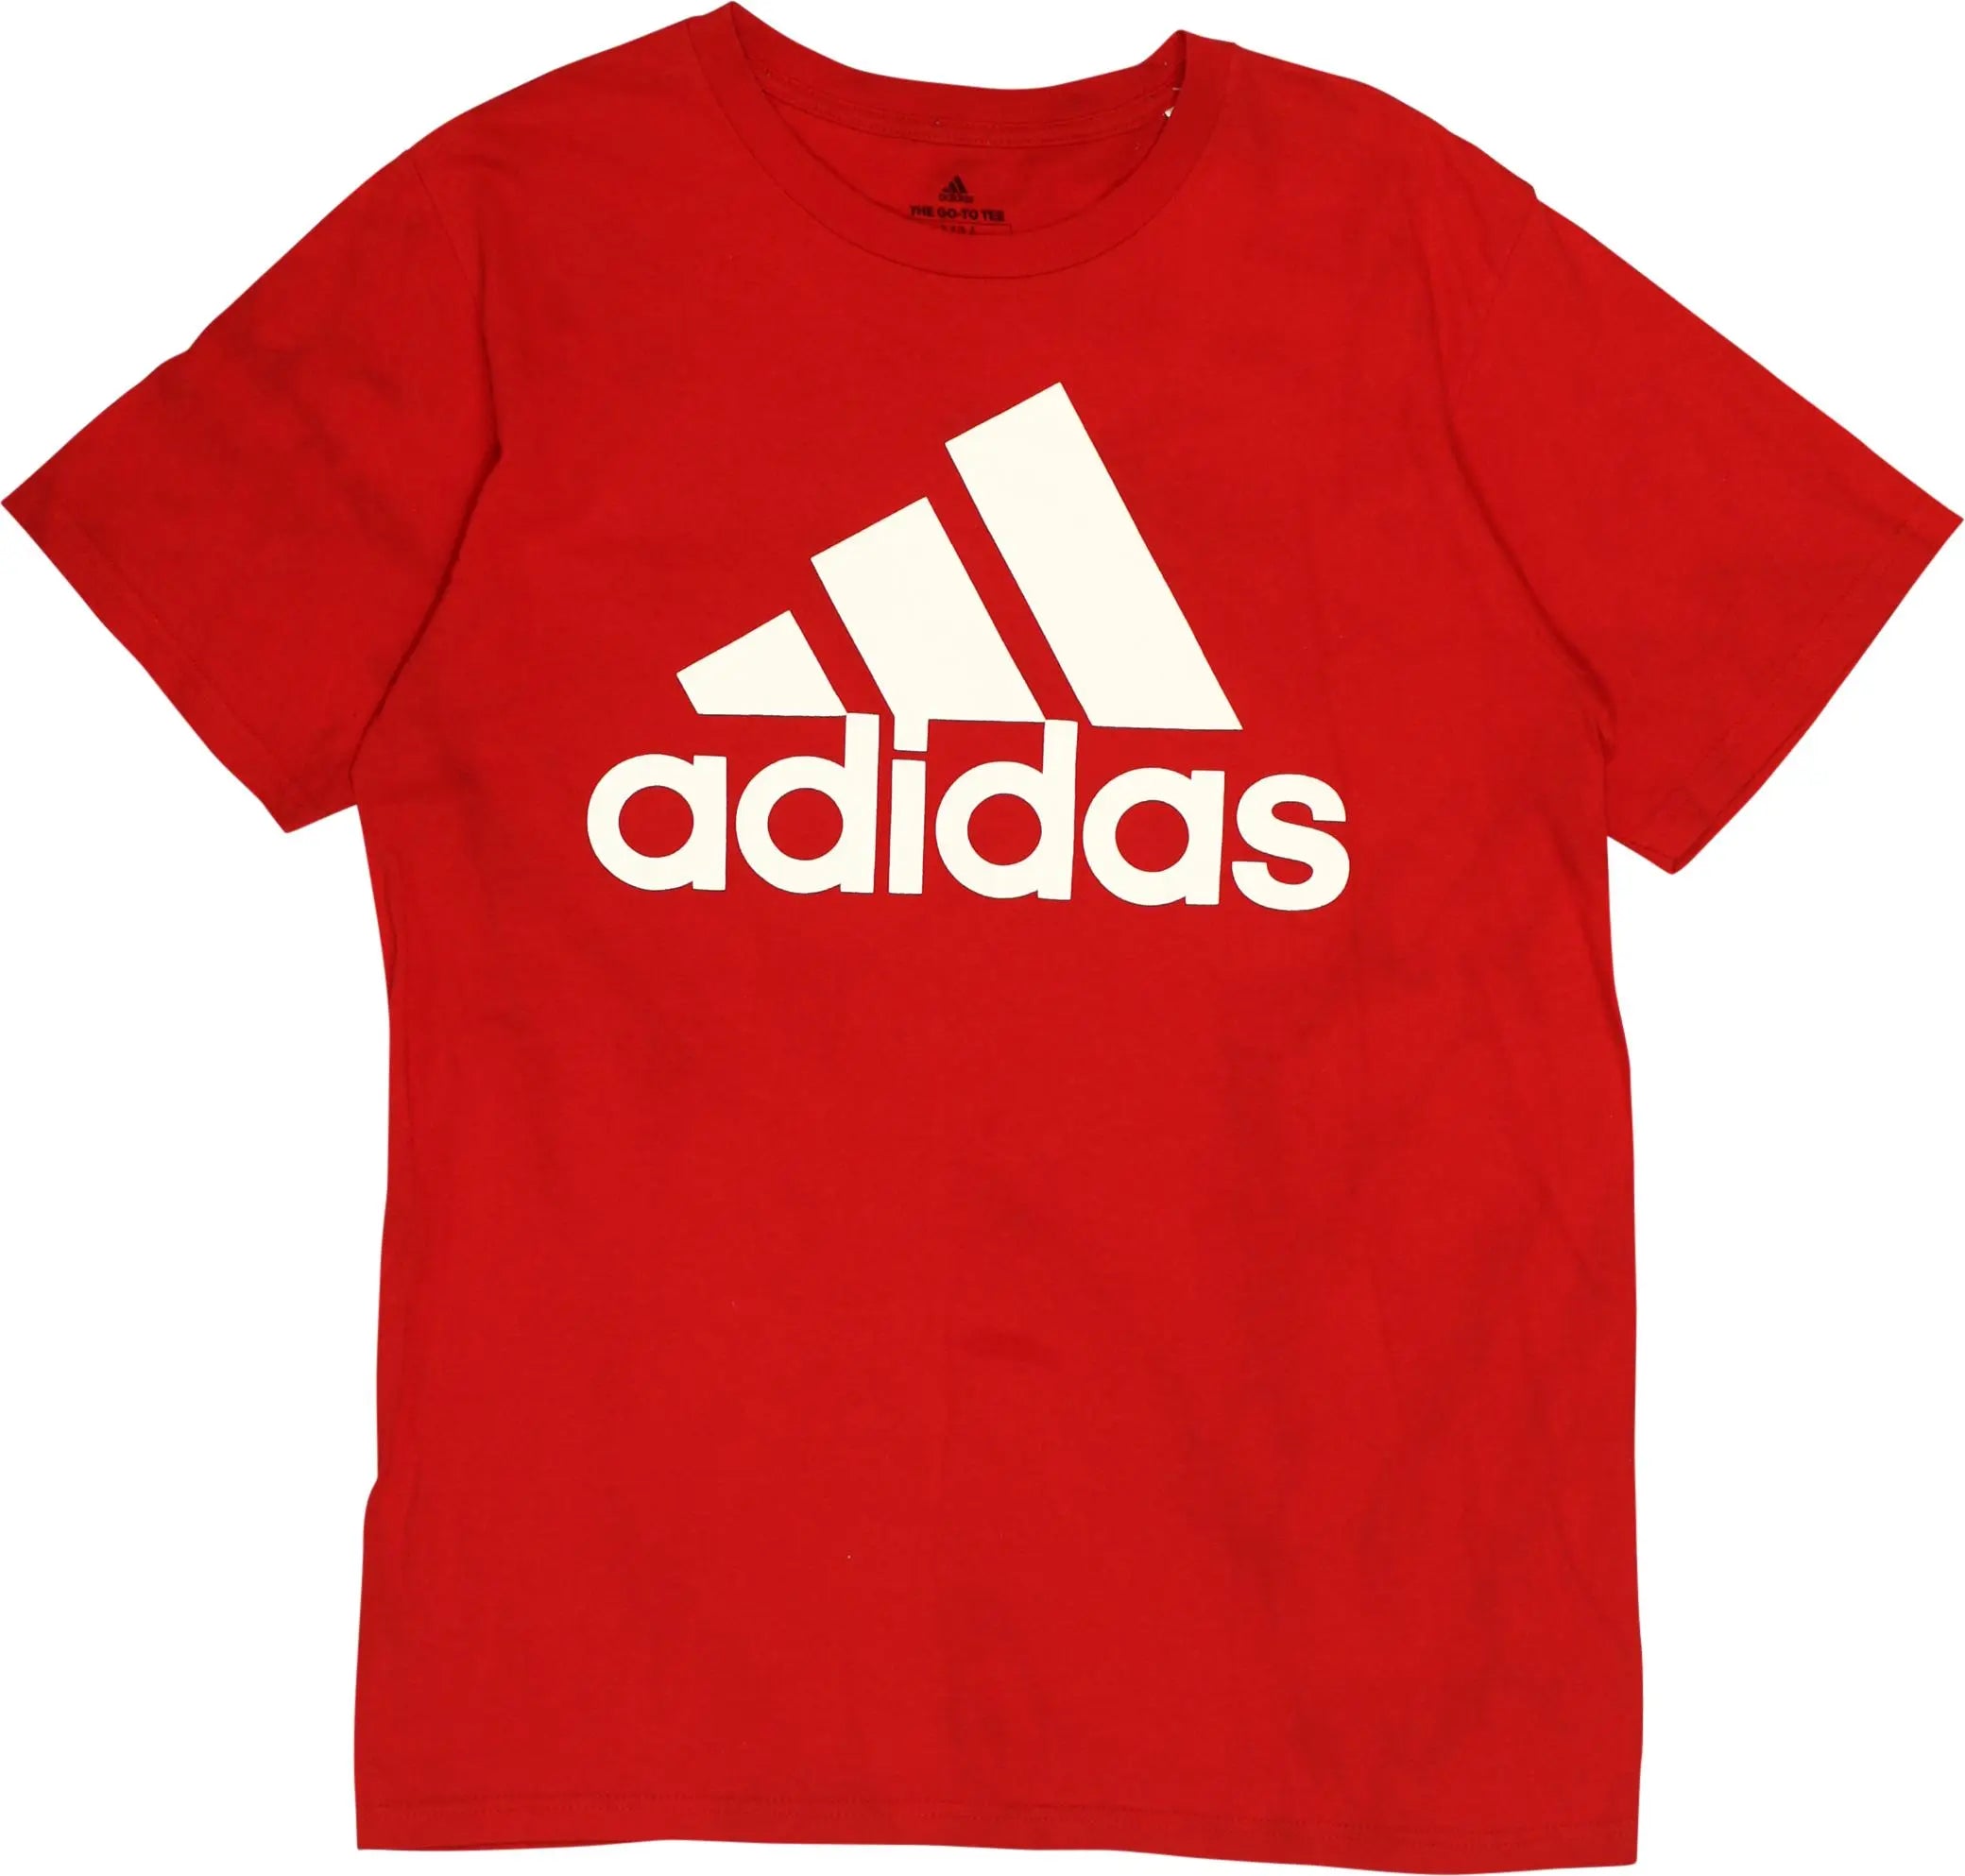 Adidas - T-shirt by Adidas- ThriftTale.com - Vintage and second handclothing